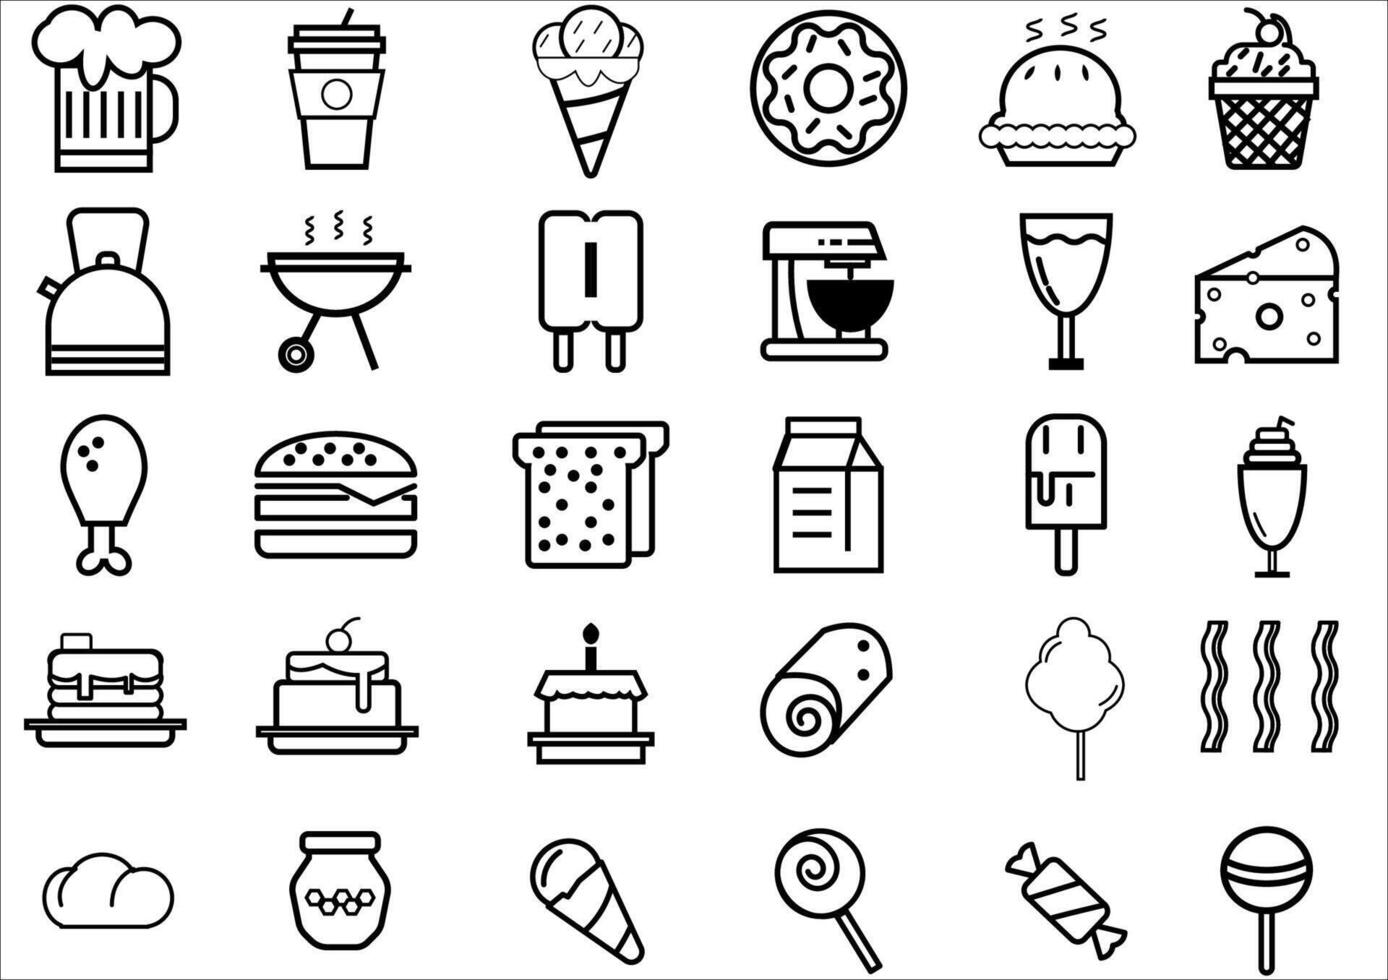 Food and dessert icons collection set.Included icons such as meat,desserts,fruits and breakfast burger with sausage,ice cream on stick.Vector meal and food concept. vector